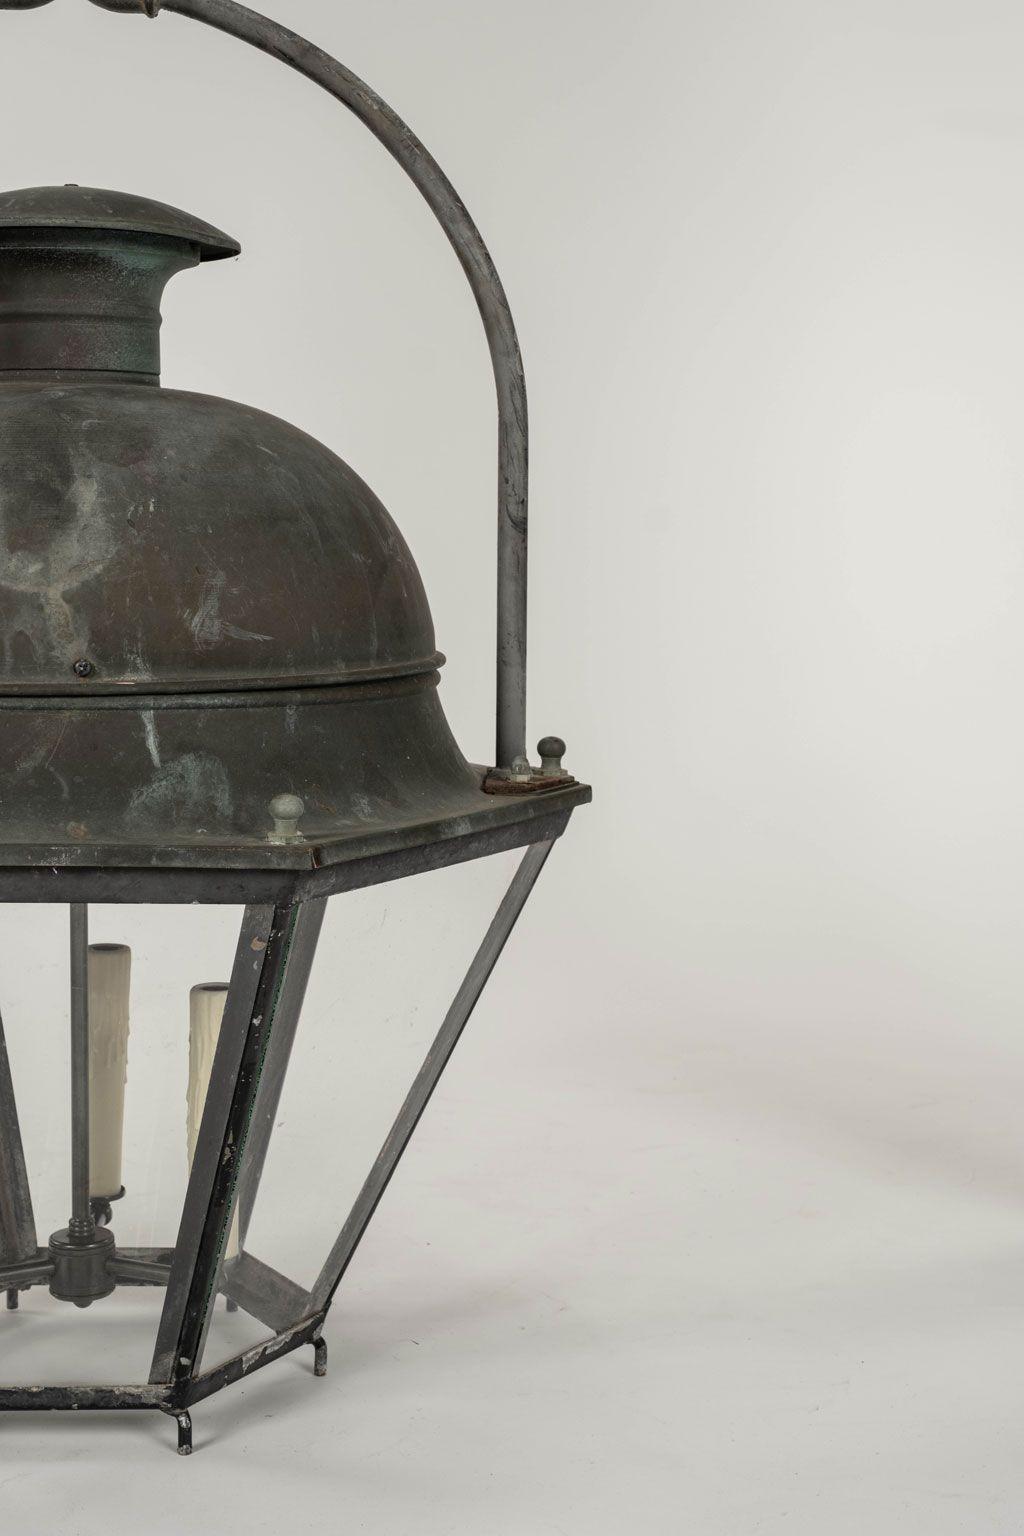 French Provincial Domed Hexagonal Glass Paneled Iron and Copper Lantern